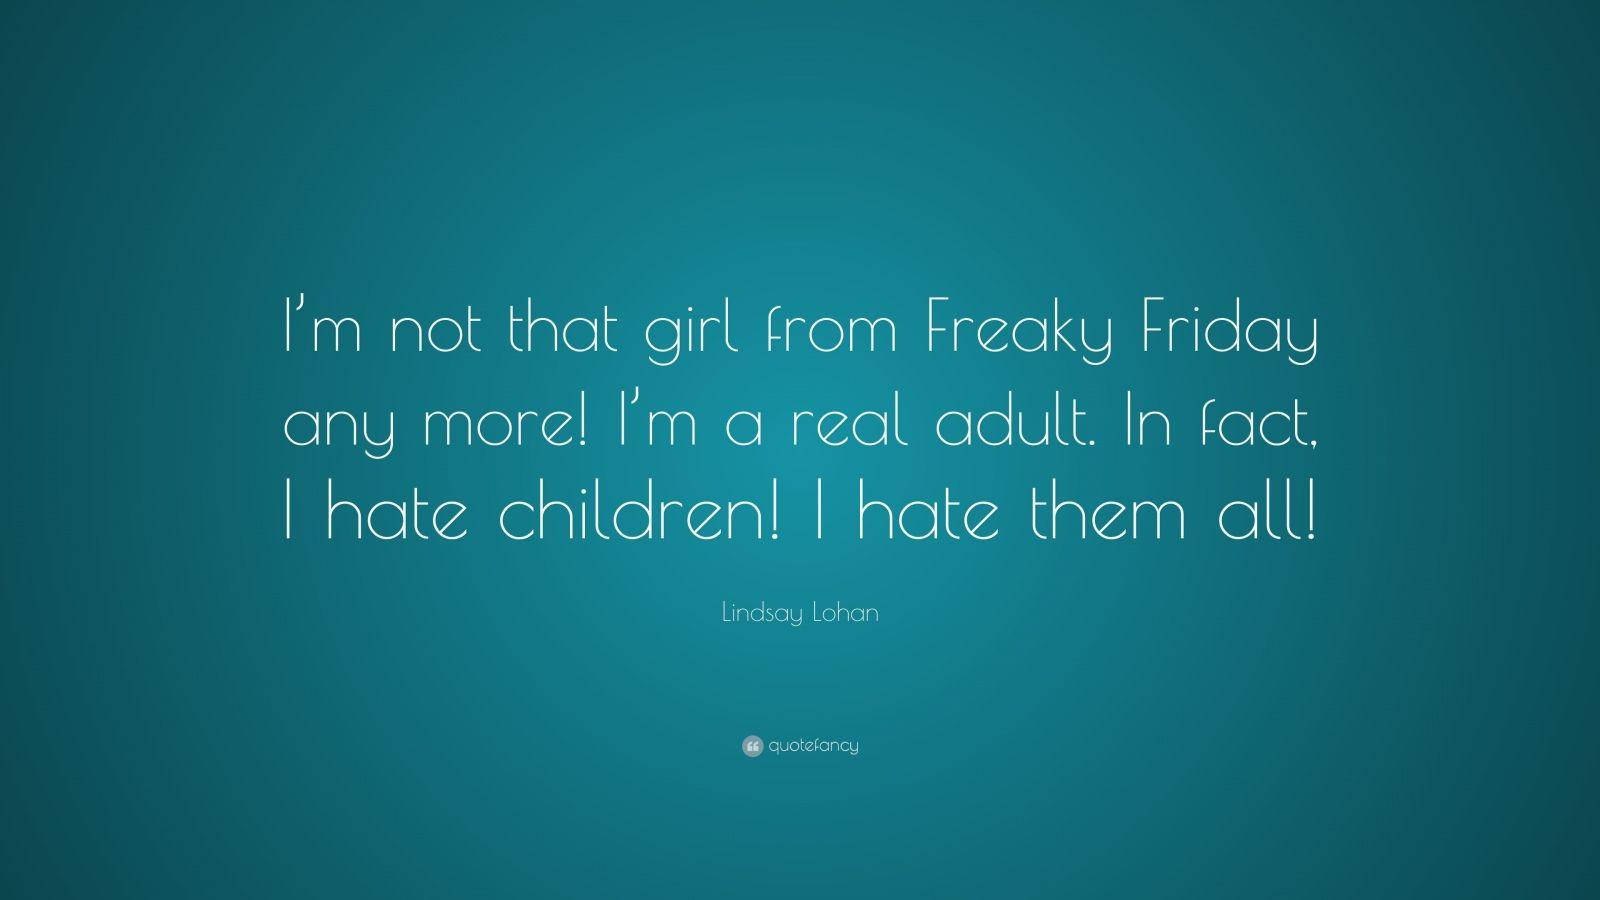 Freaky Friday Lindsay Lohan Quote On Green Wallpaper